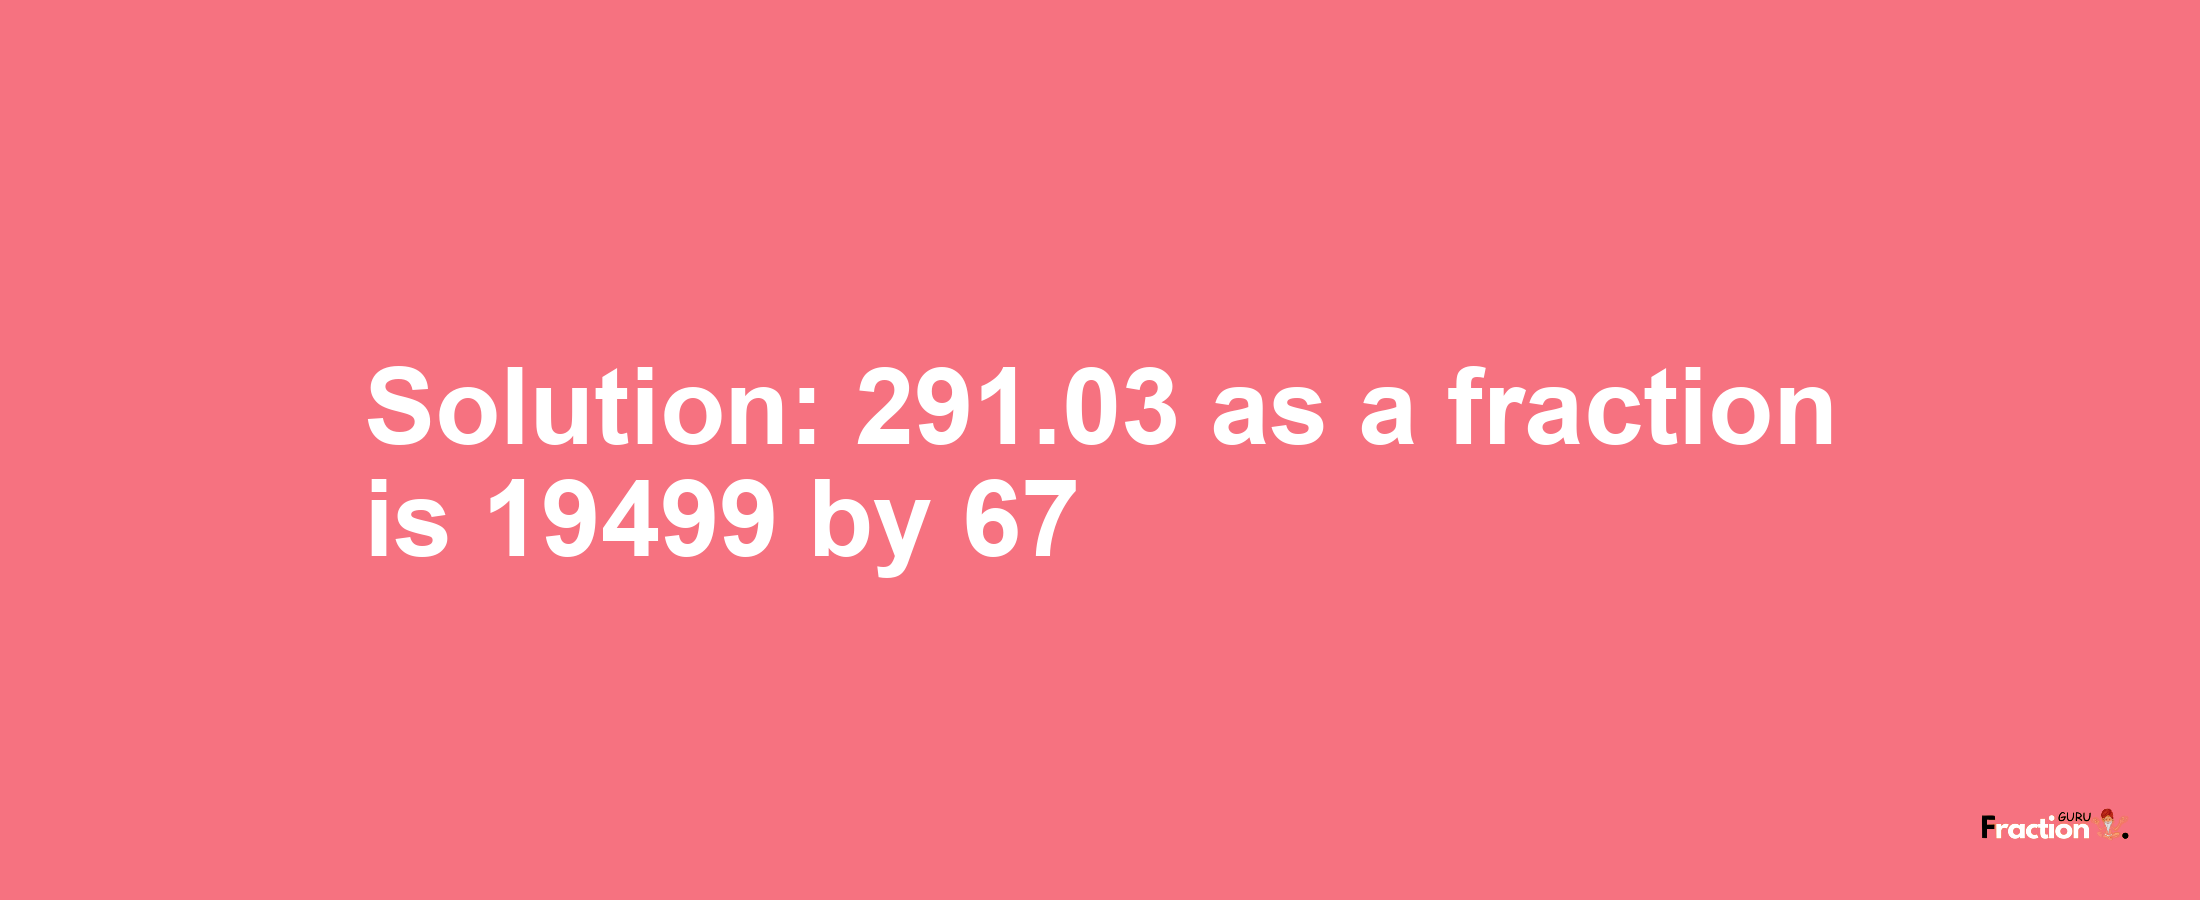 Solution:291.03 as a fraction is 19499/67